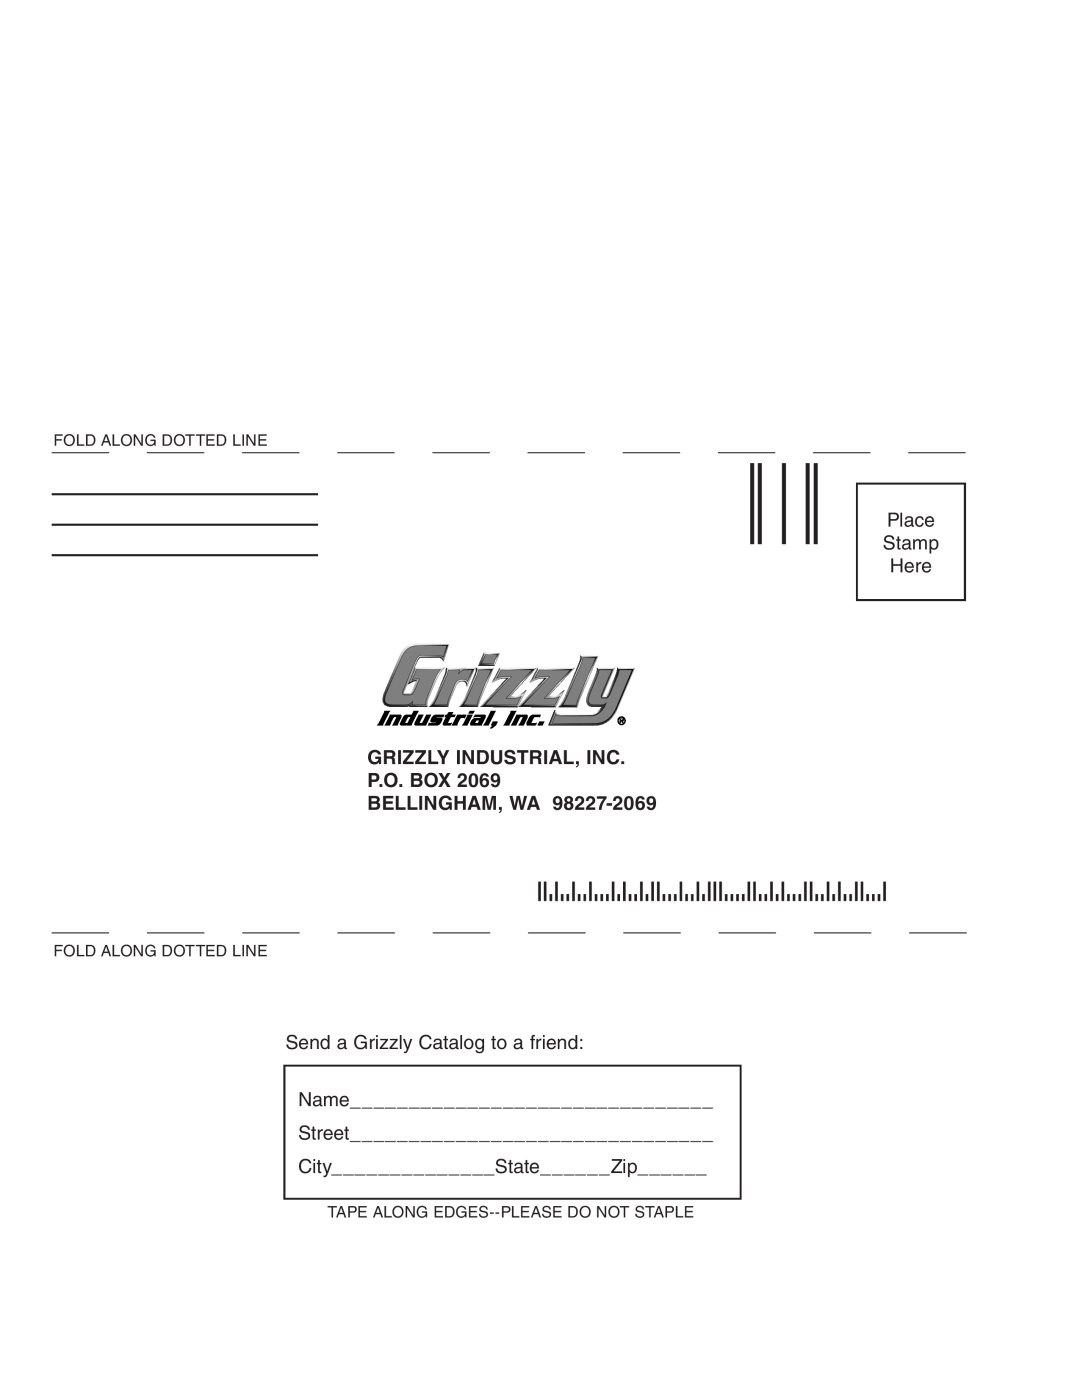 Grizzly G0710 owner manual Grizzly Industrial, Inc P.O. Box Bellingham, Wa, Place Stamp Here 